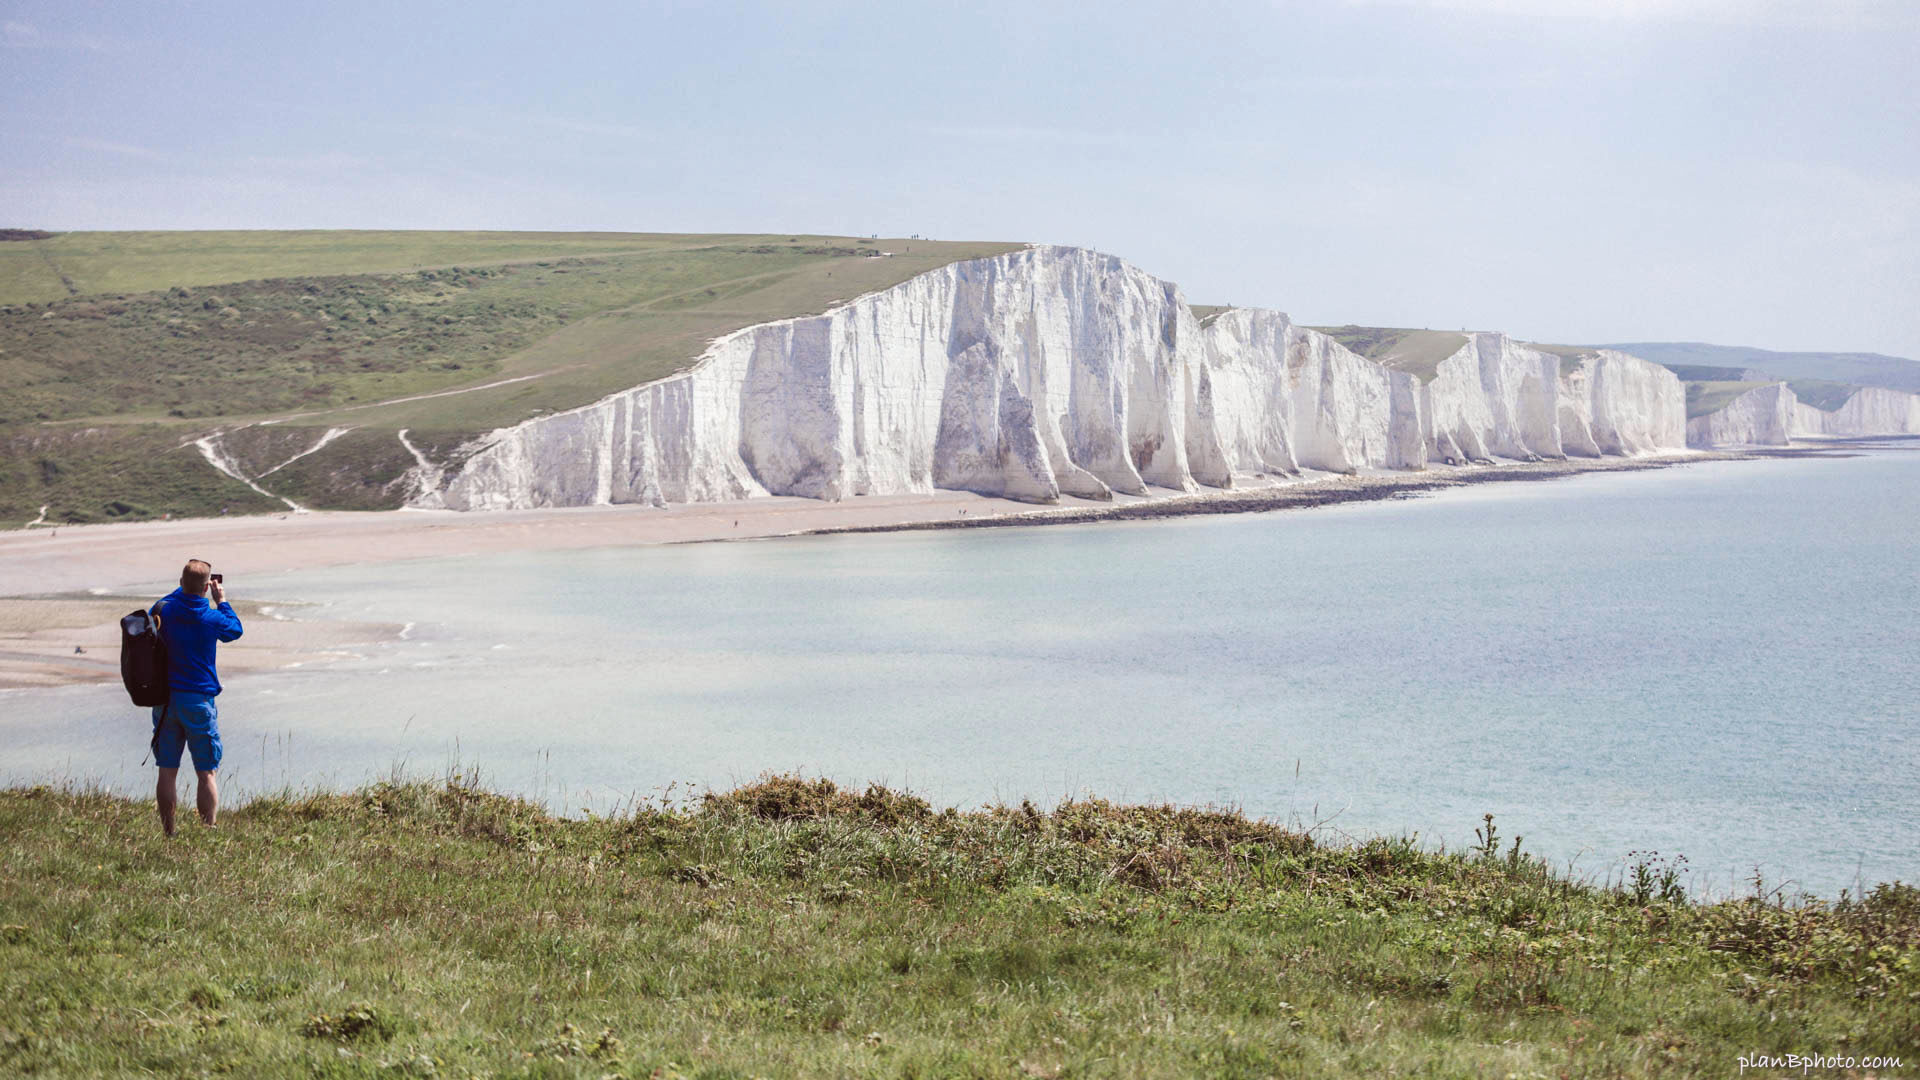 A man taking picture of Seven sisters cliffs